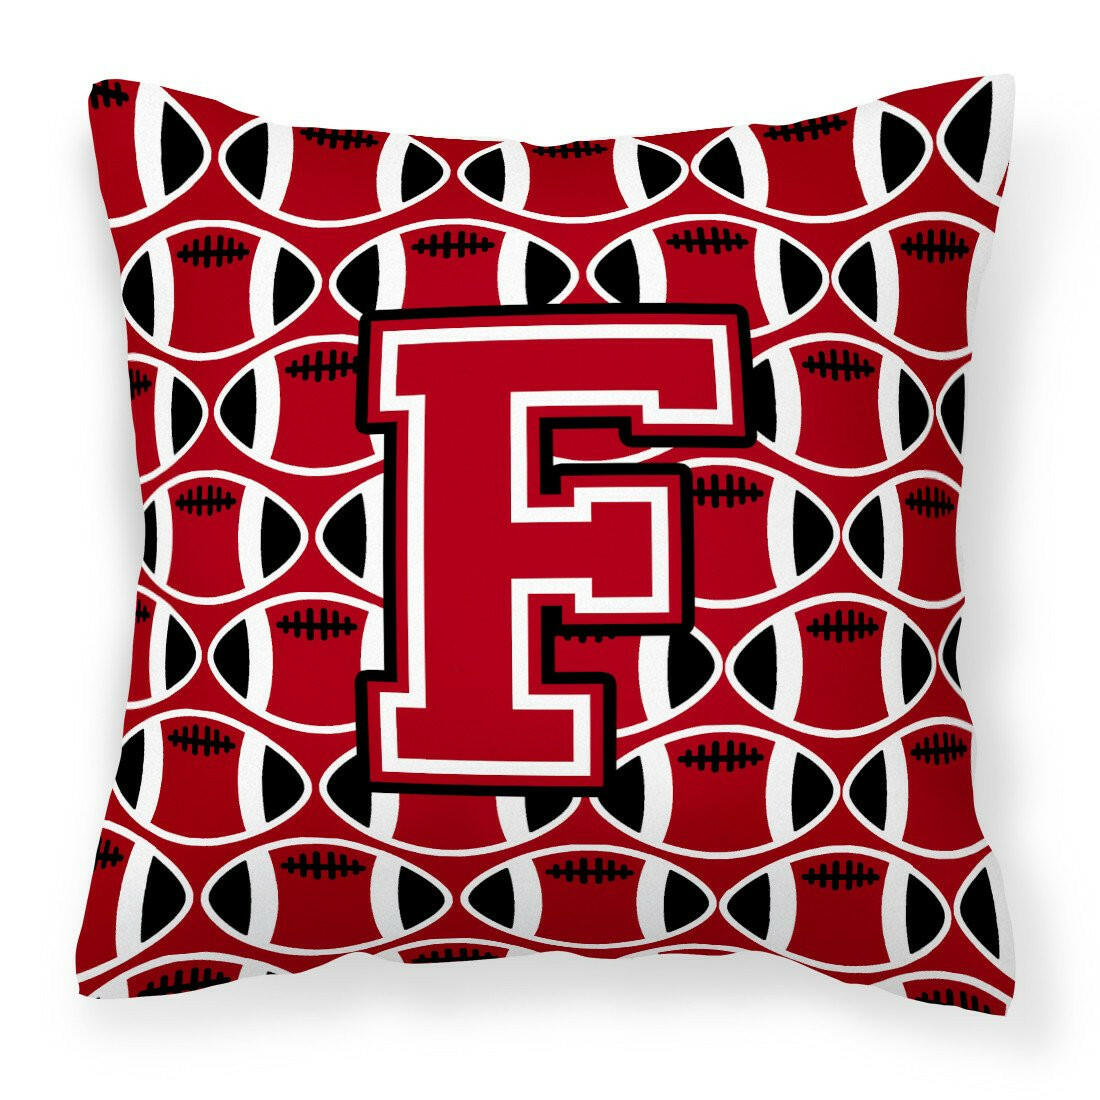 Letter F Football Red, Black and White Fabric Decorative Pillow CJ1073-FPW1414 by Caroline's Treasures